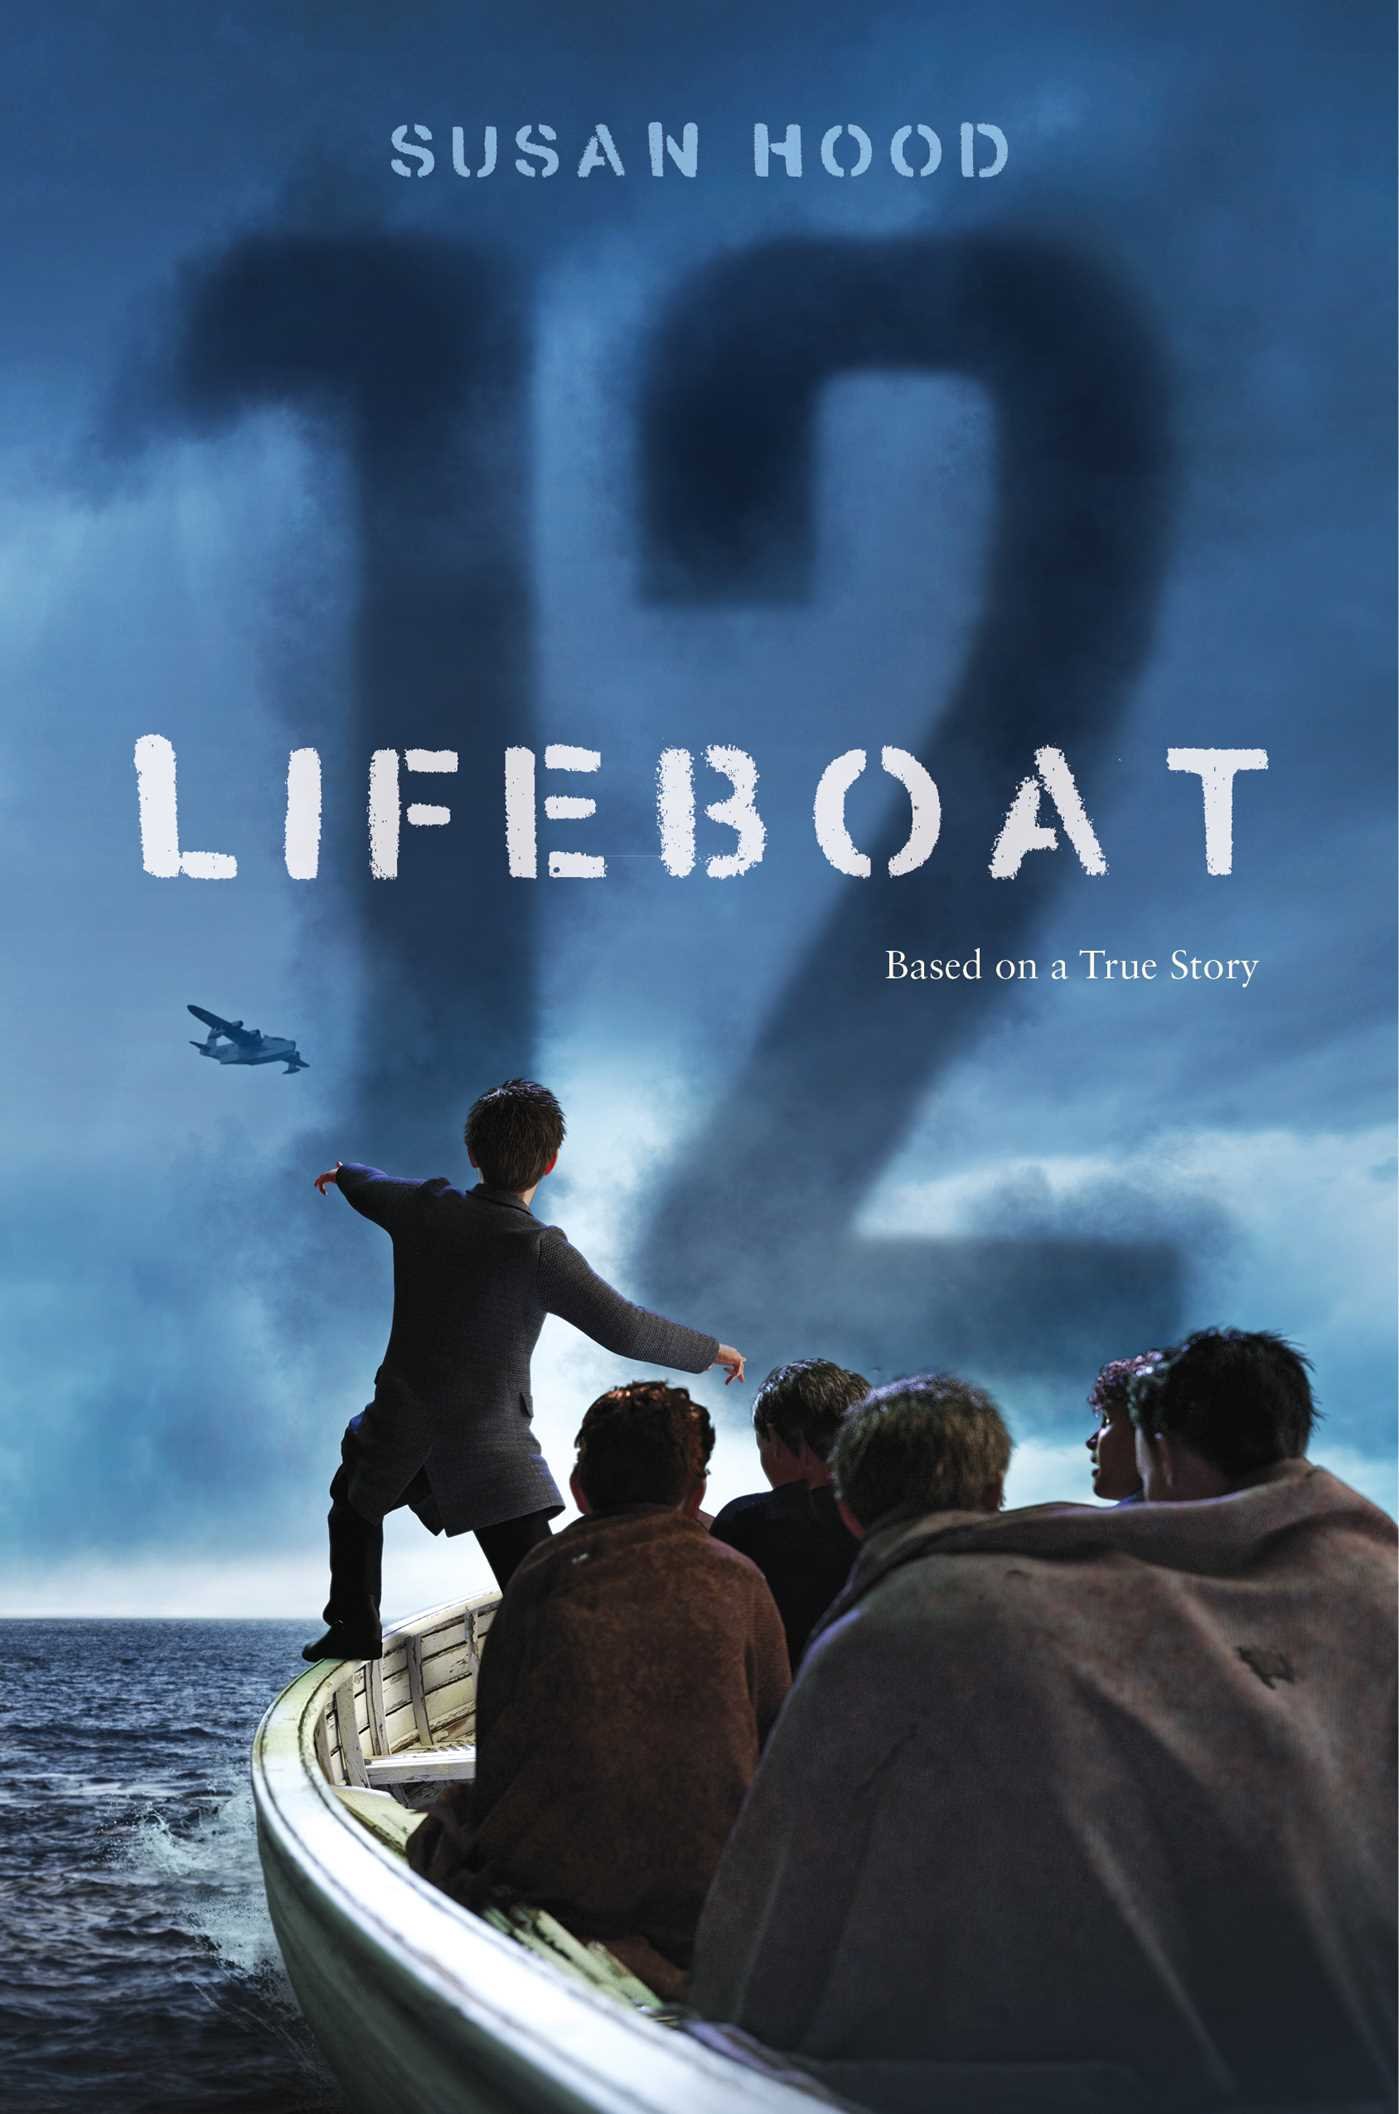 Image for "Lifeboat 12"